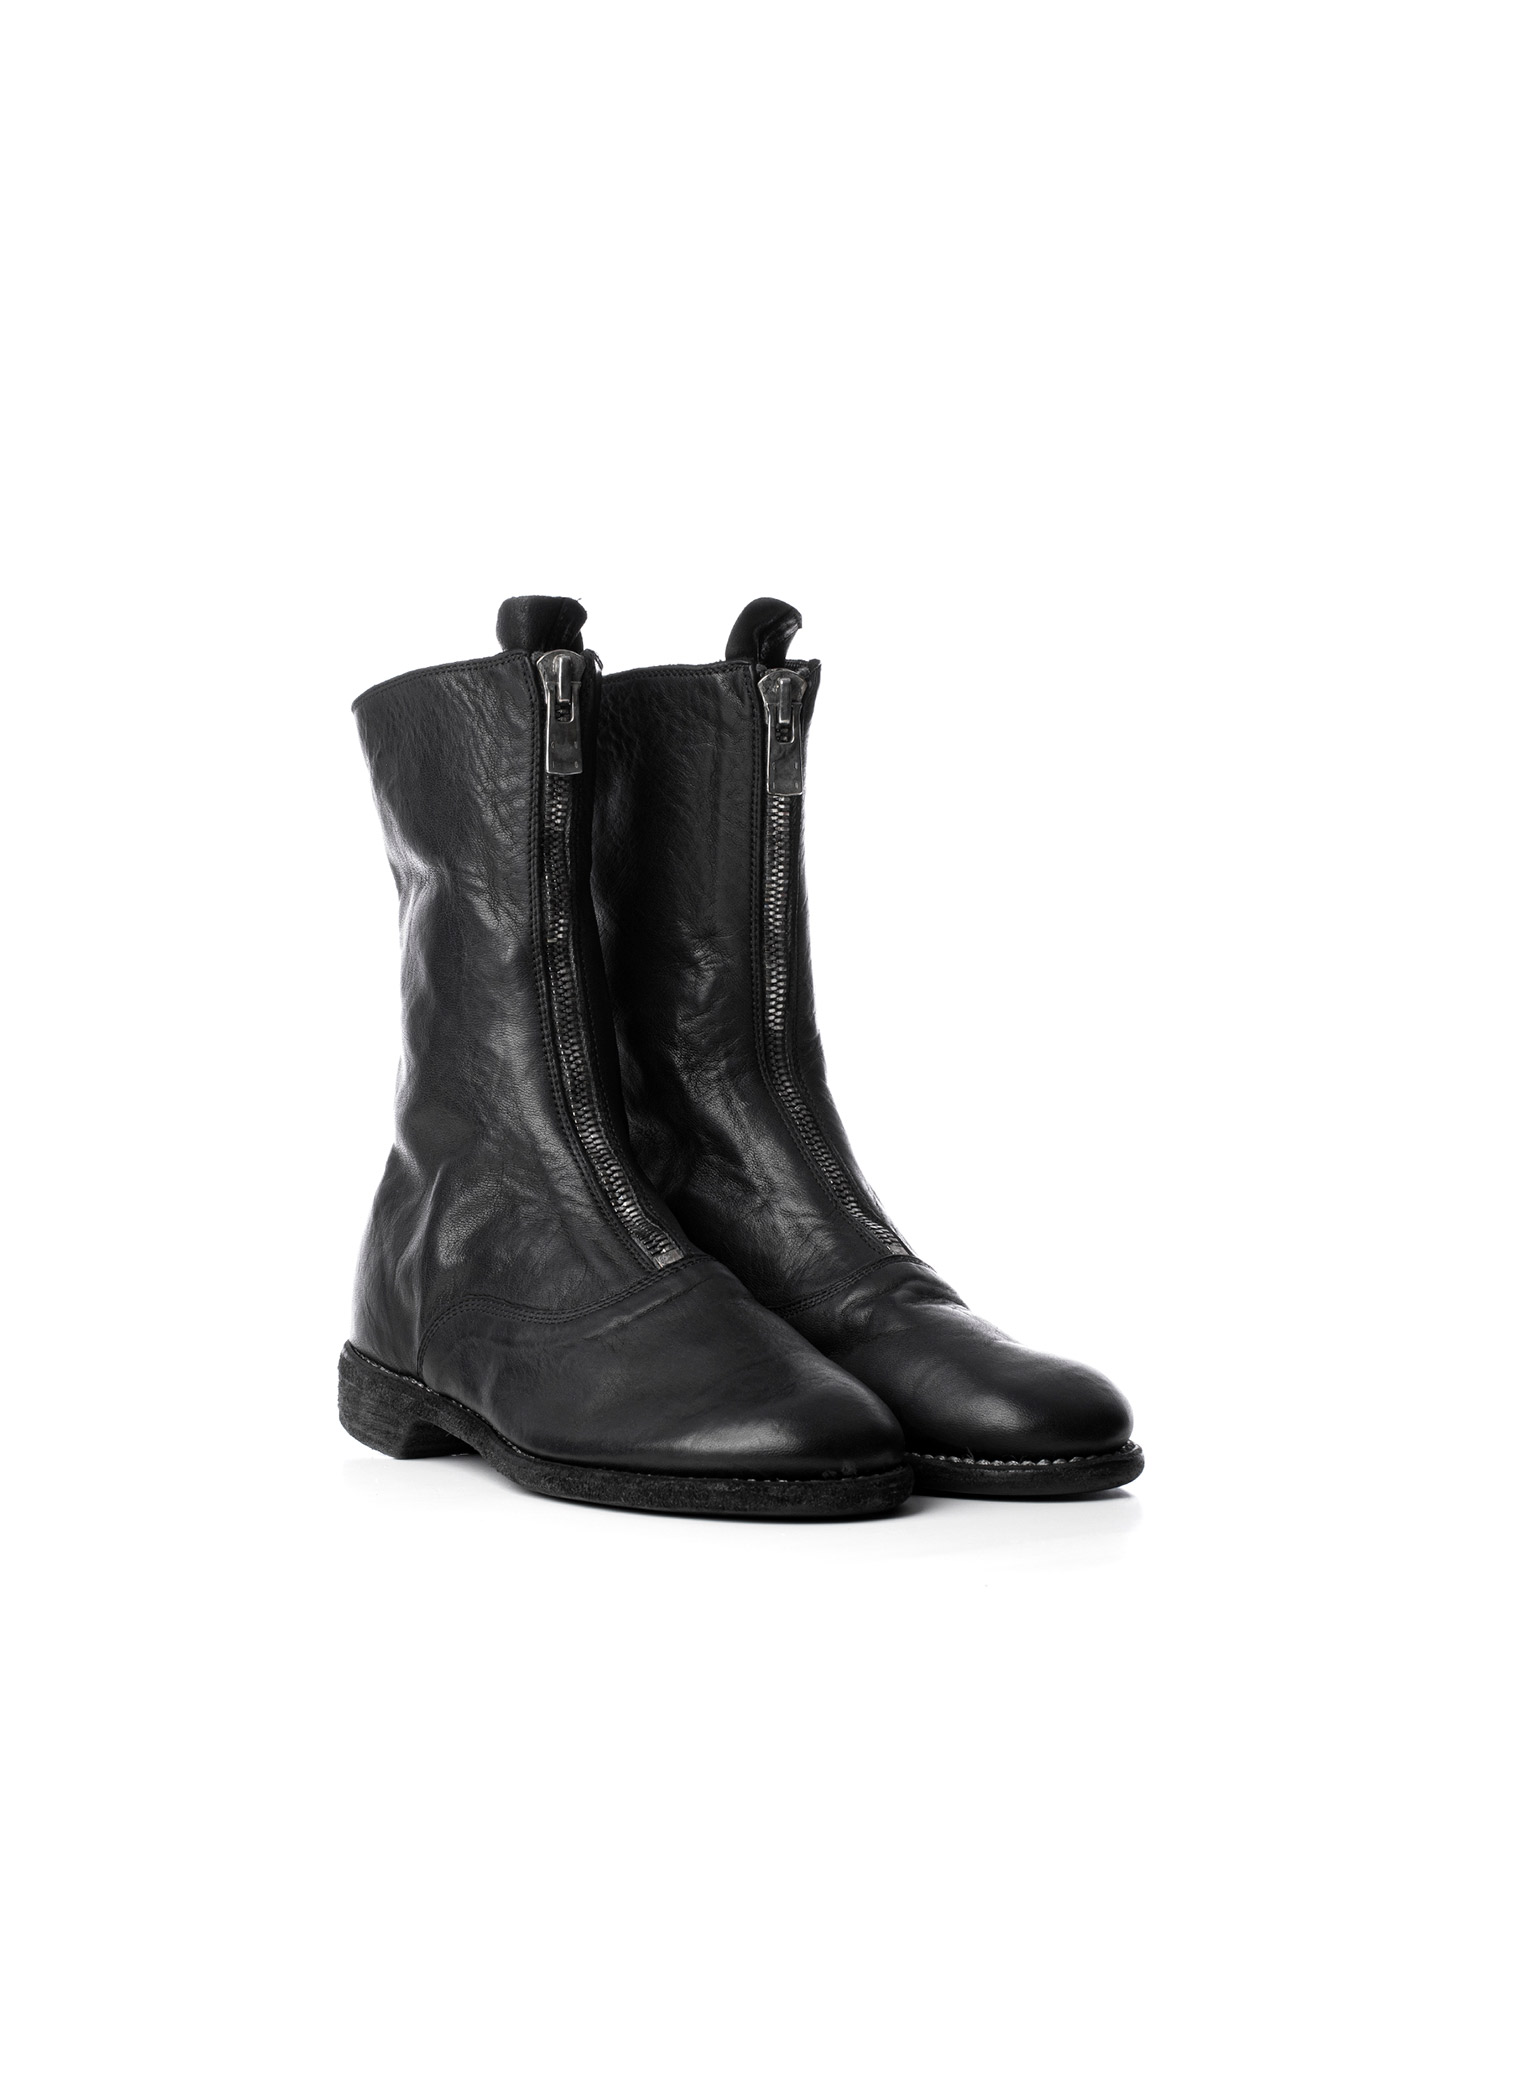 hide-m | GUIDI 310 Army Front Zip Boot Women, black horse leather